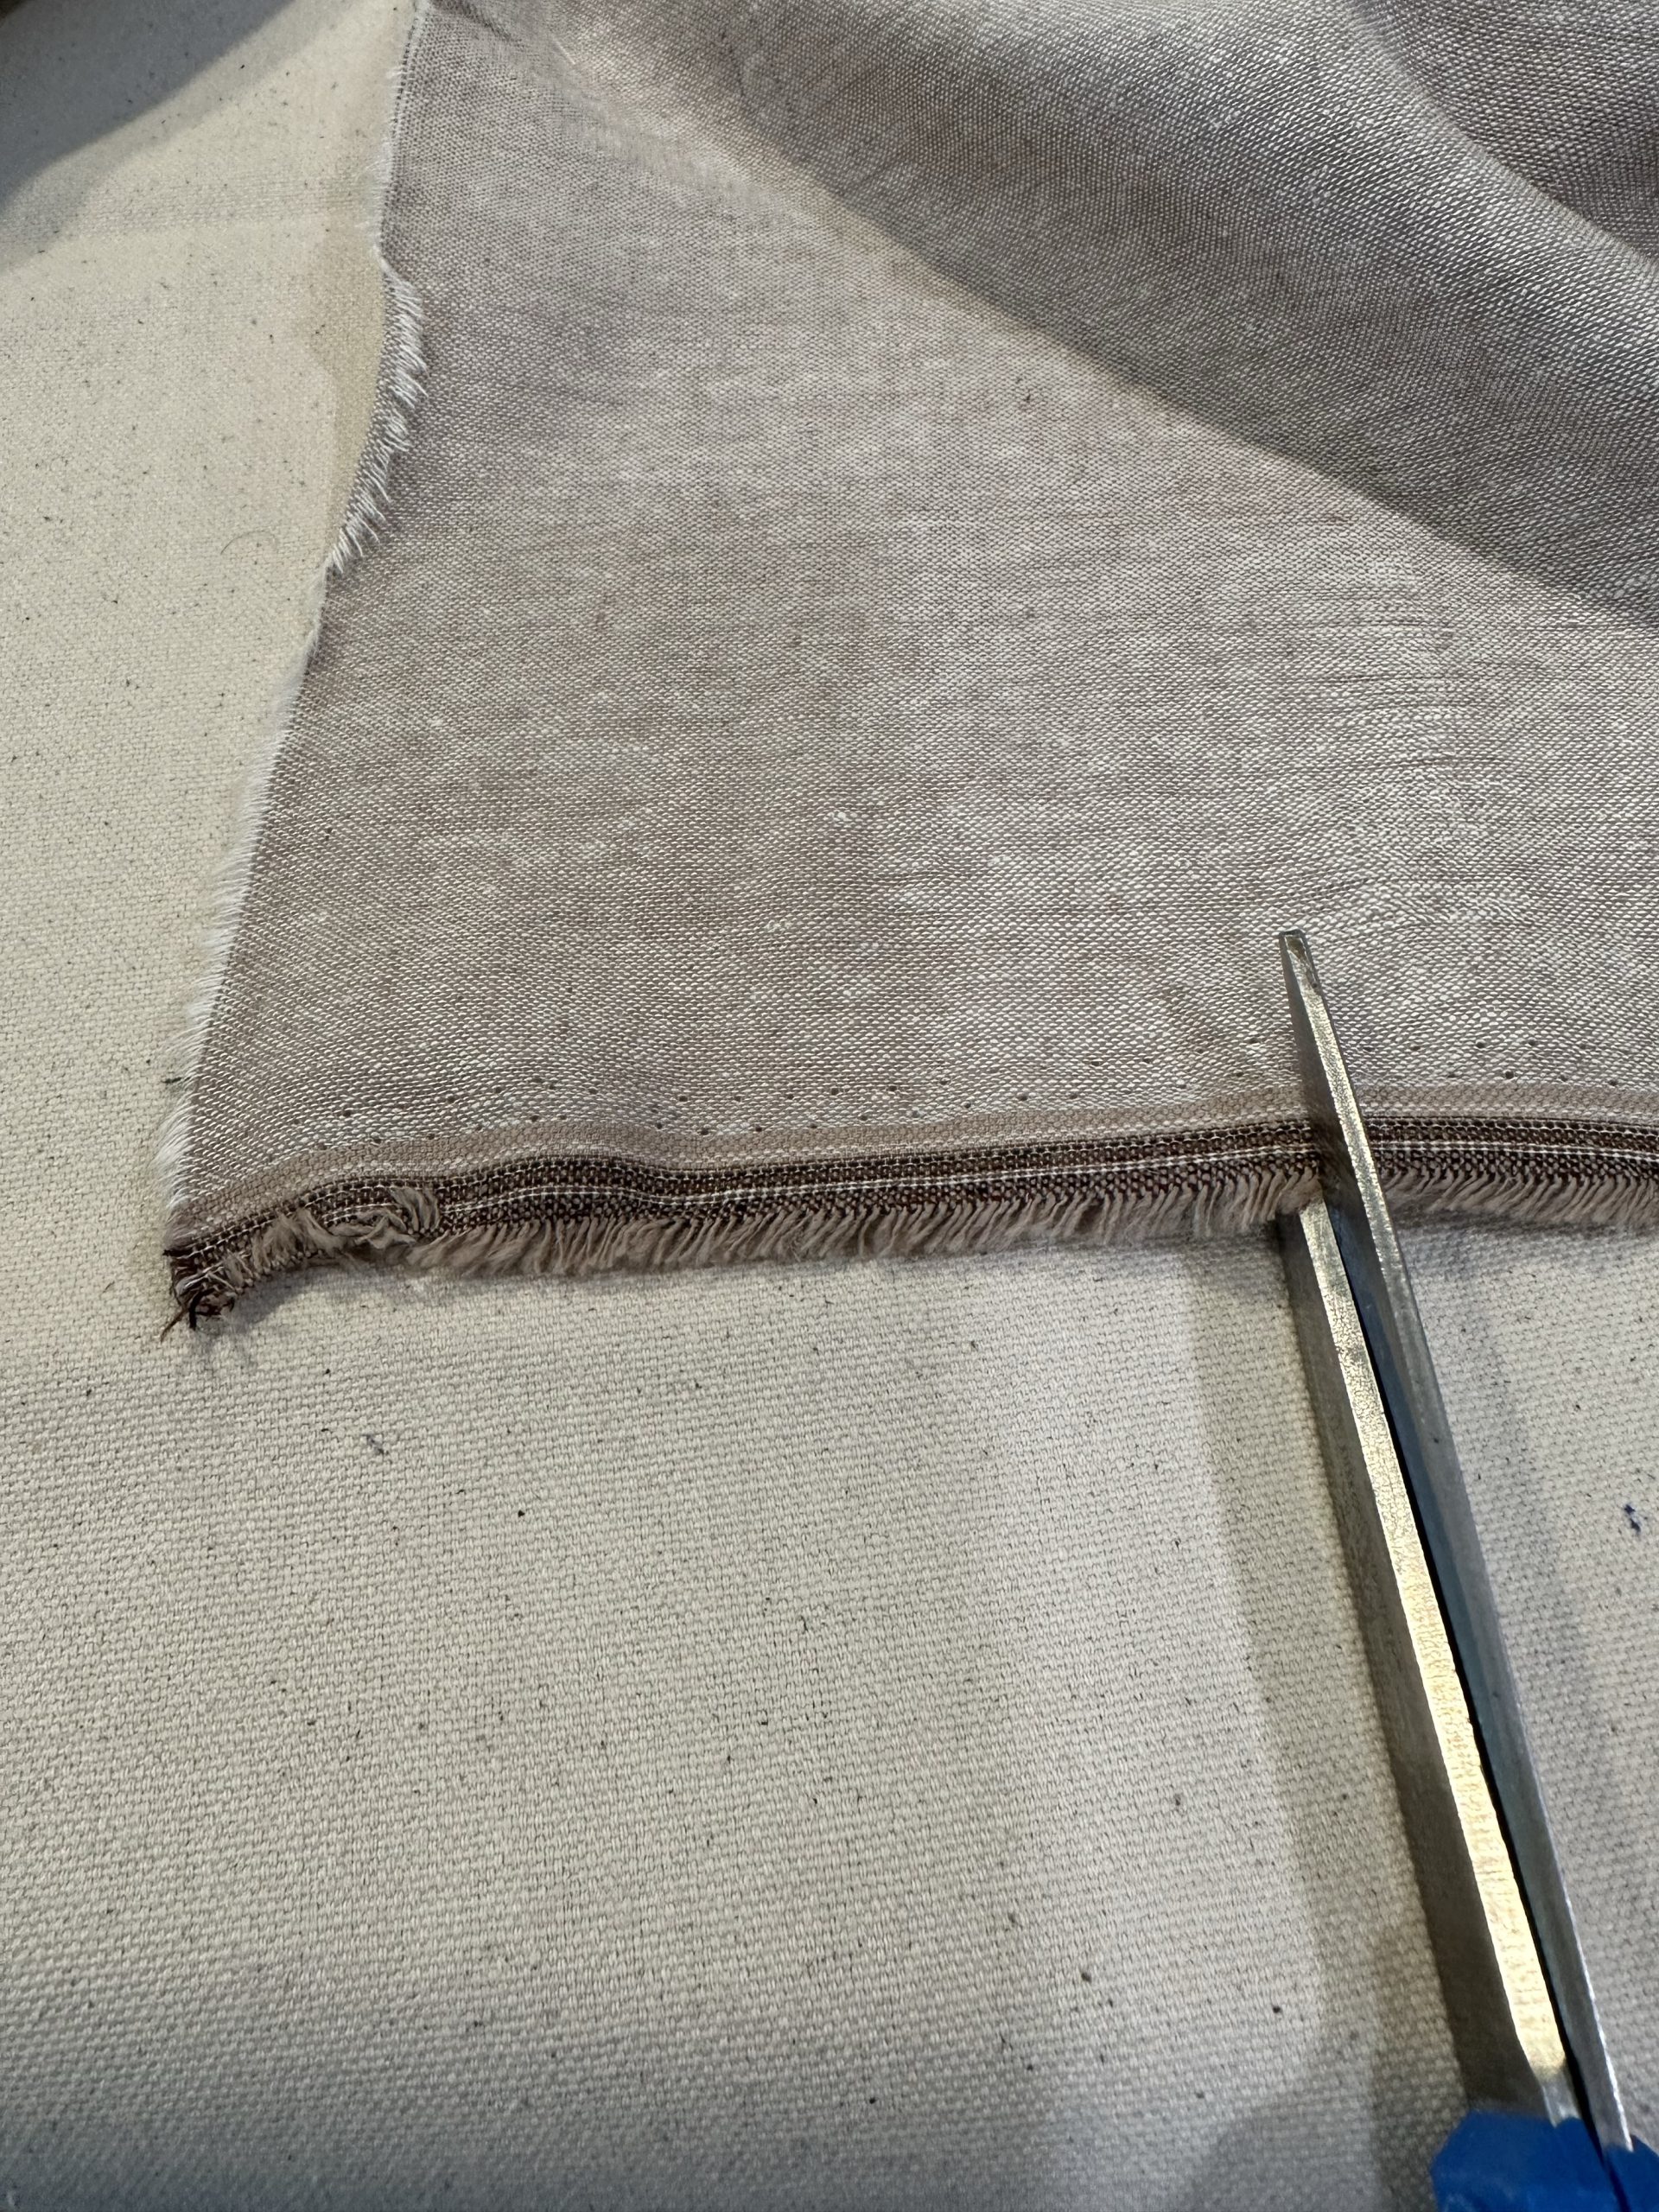 tearing linen fabric for a bookmark